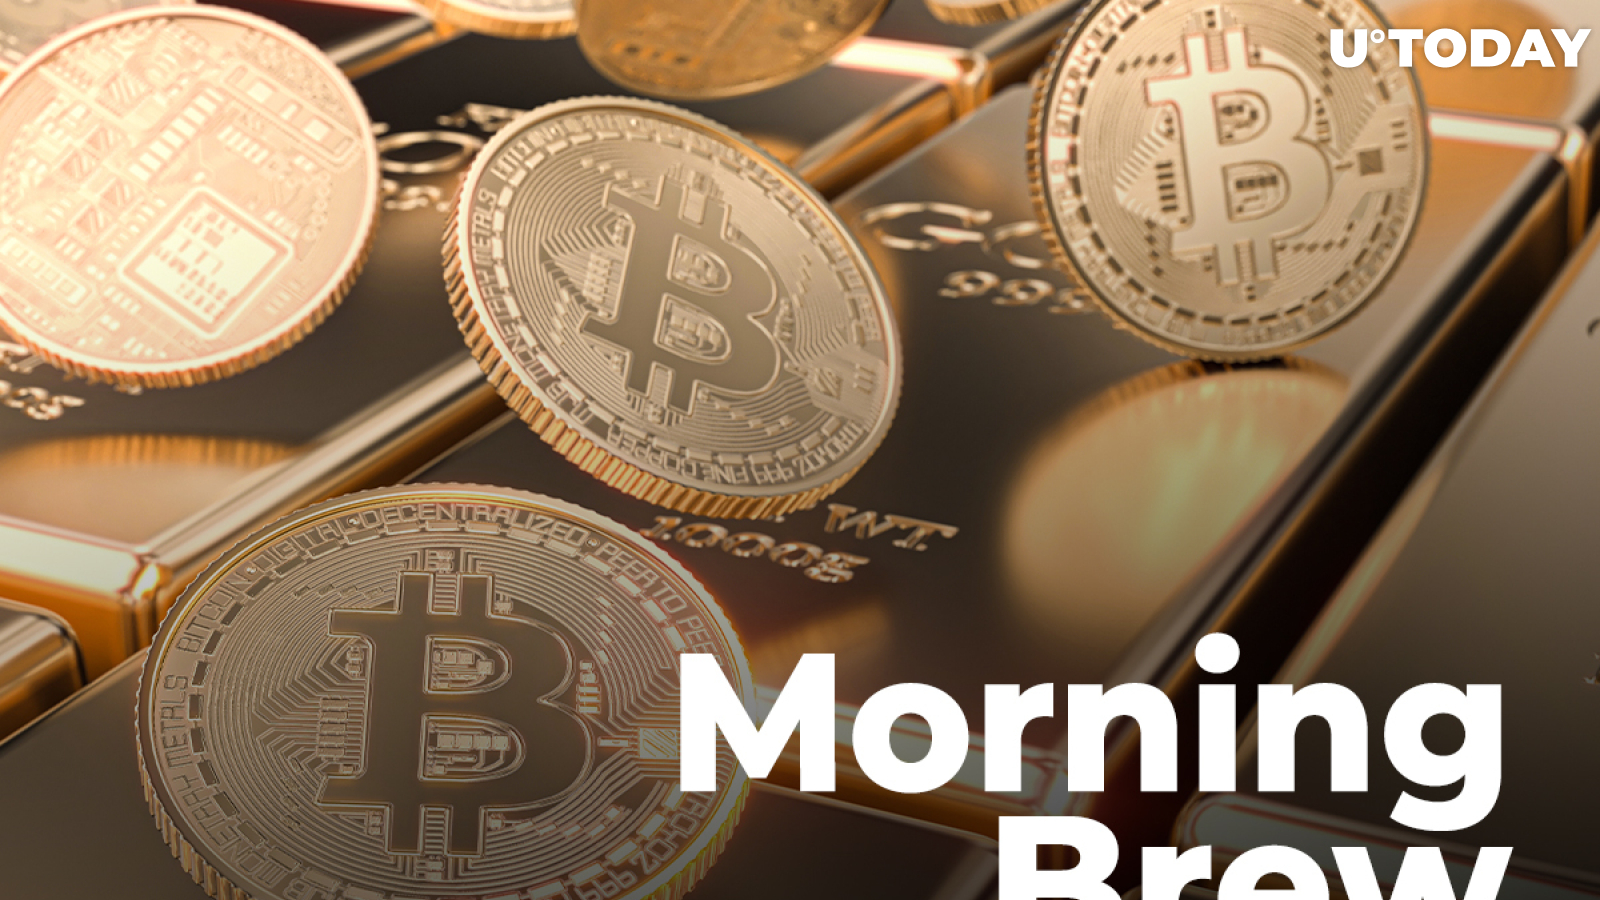 Popular Newsletter Morning Brew Replaces Gold with Bitcoin in Its Markets Section